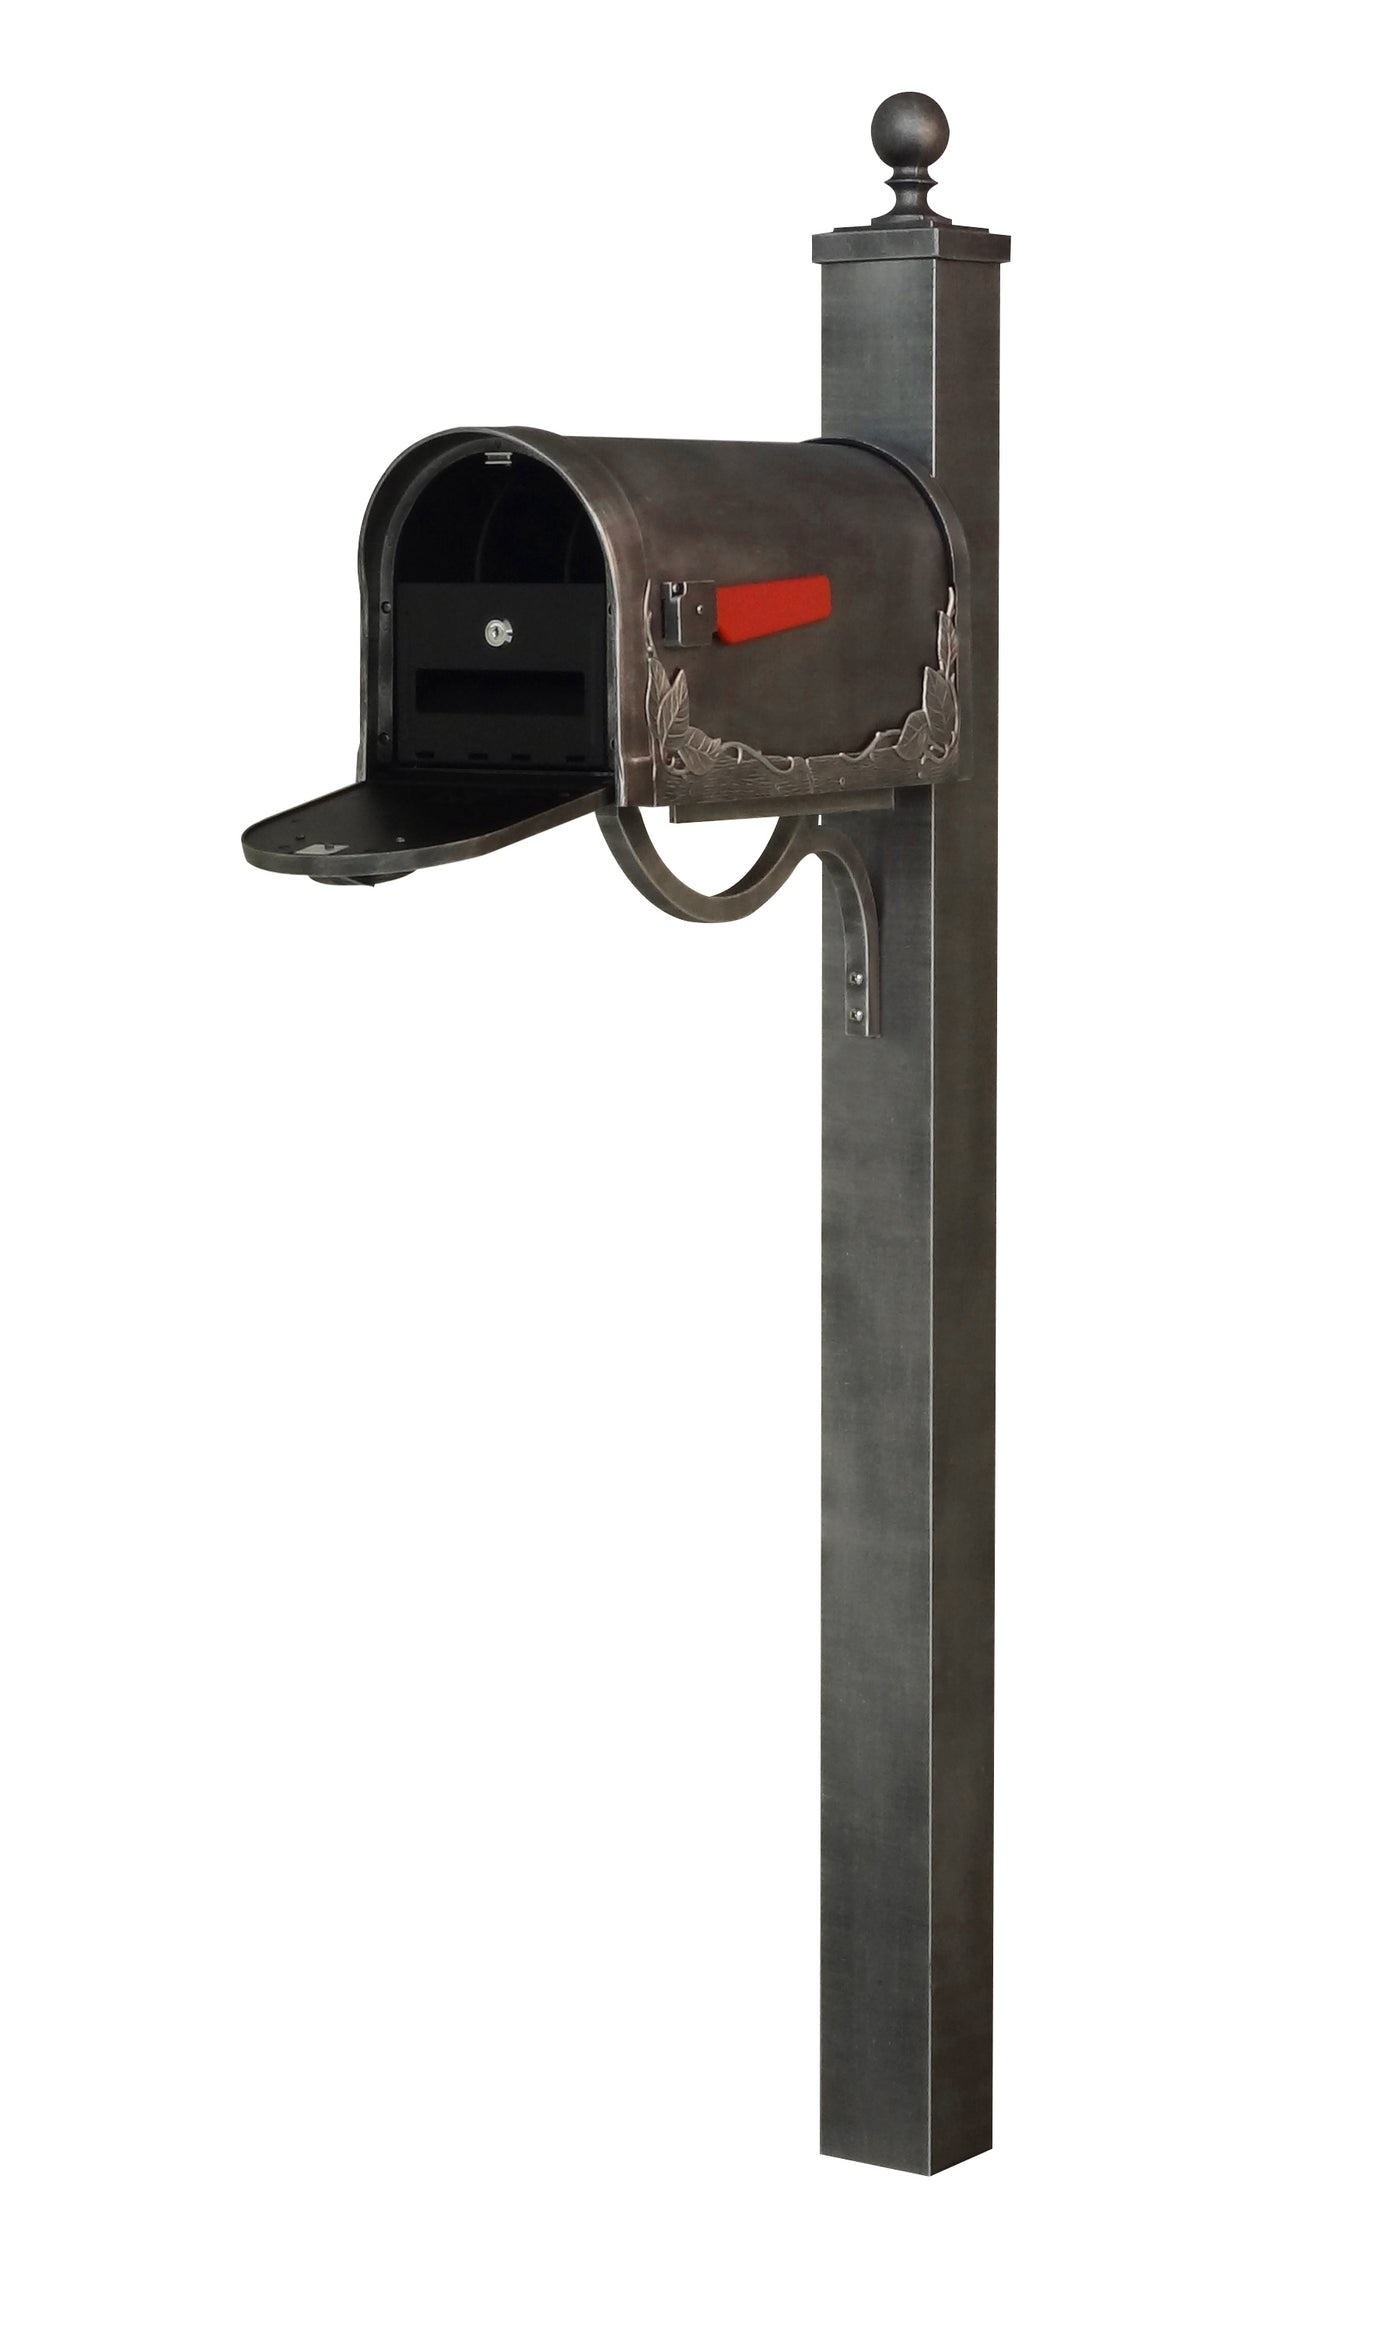 Floral Curbside Mailbox with Locking Insert and Springfield Mailbox Post